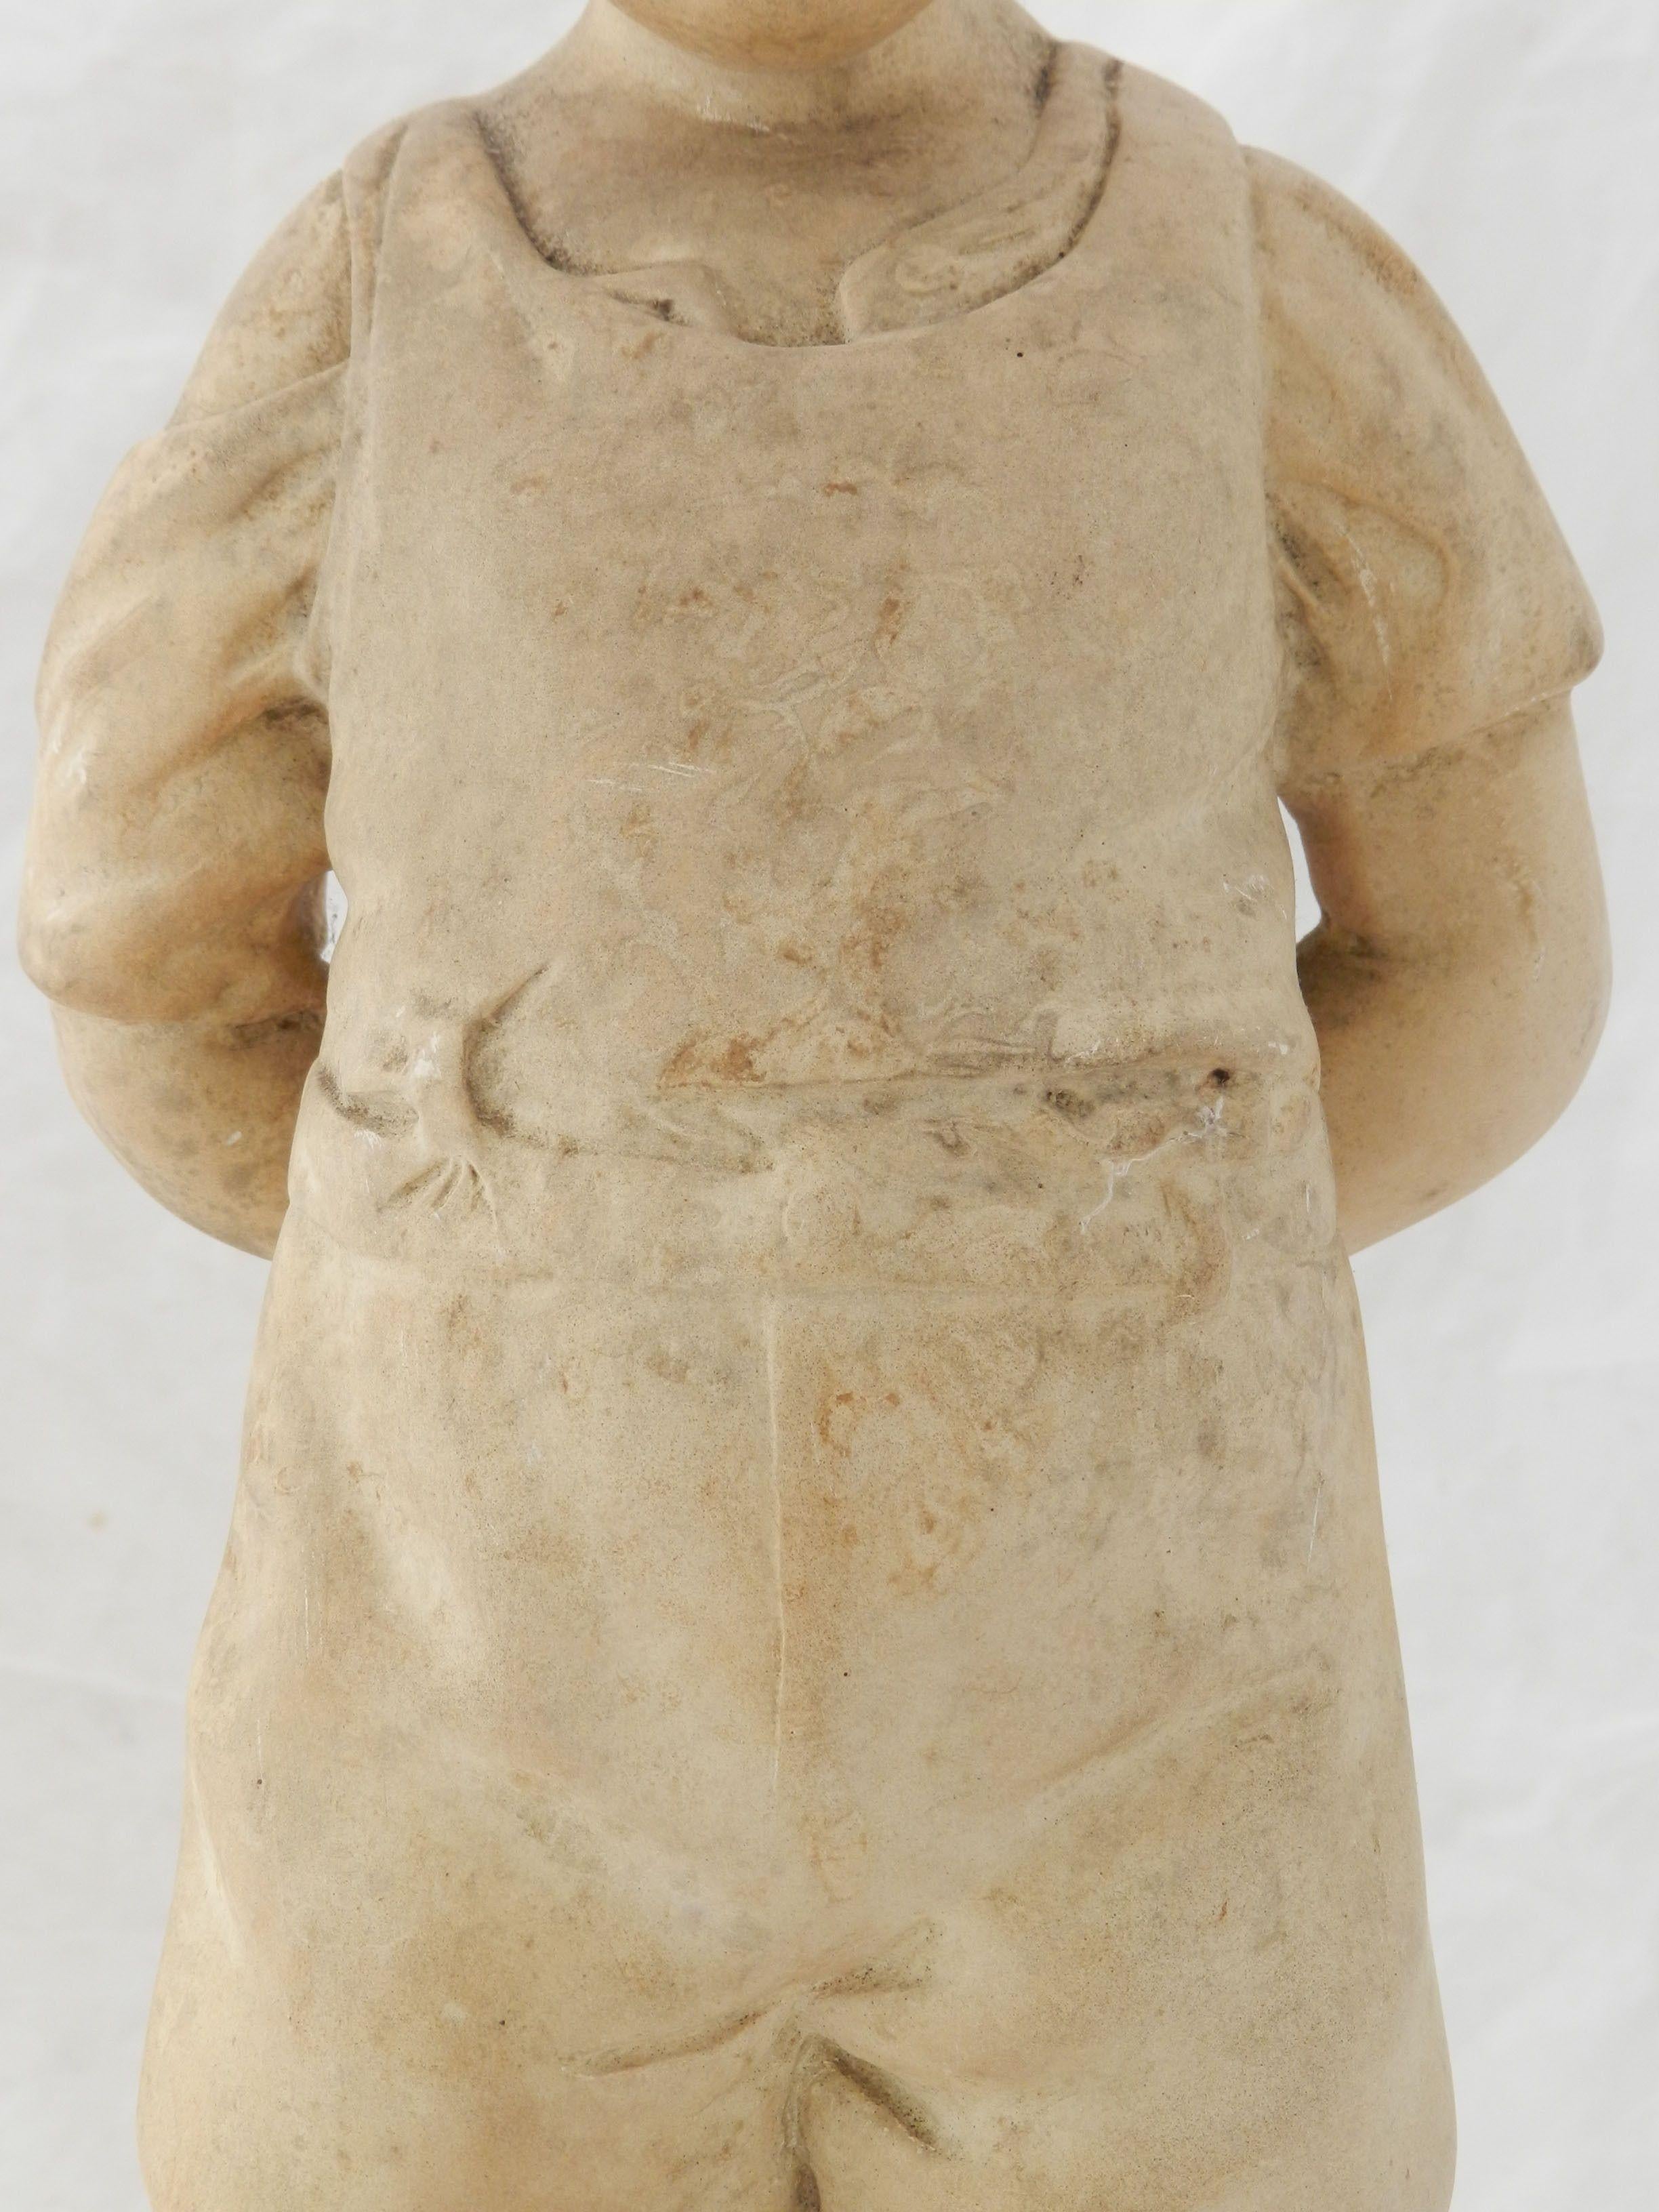 Boy with Frog Chalkware Hard Plaster Statue, c1910-20 FREE SHIPPING 4